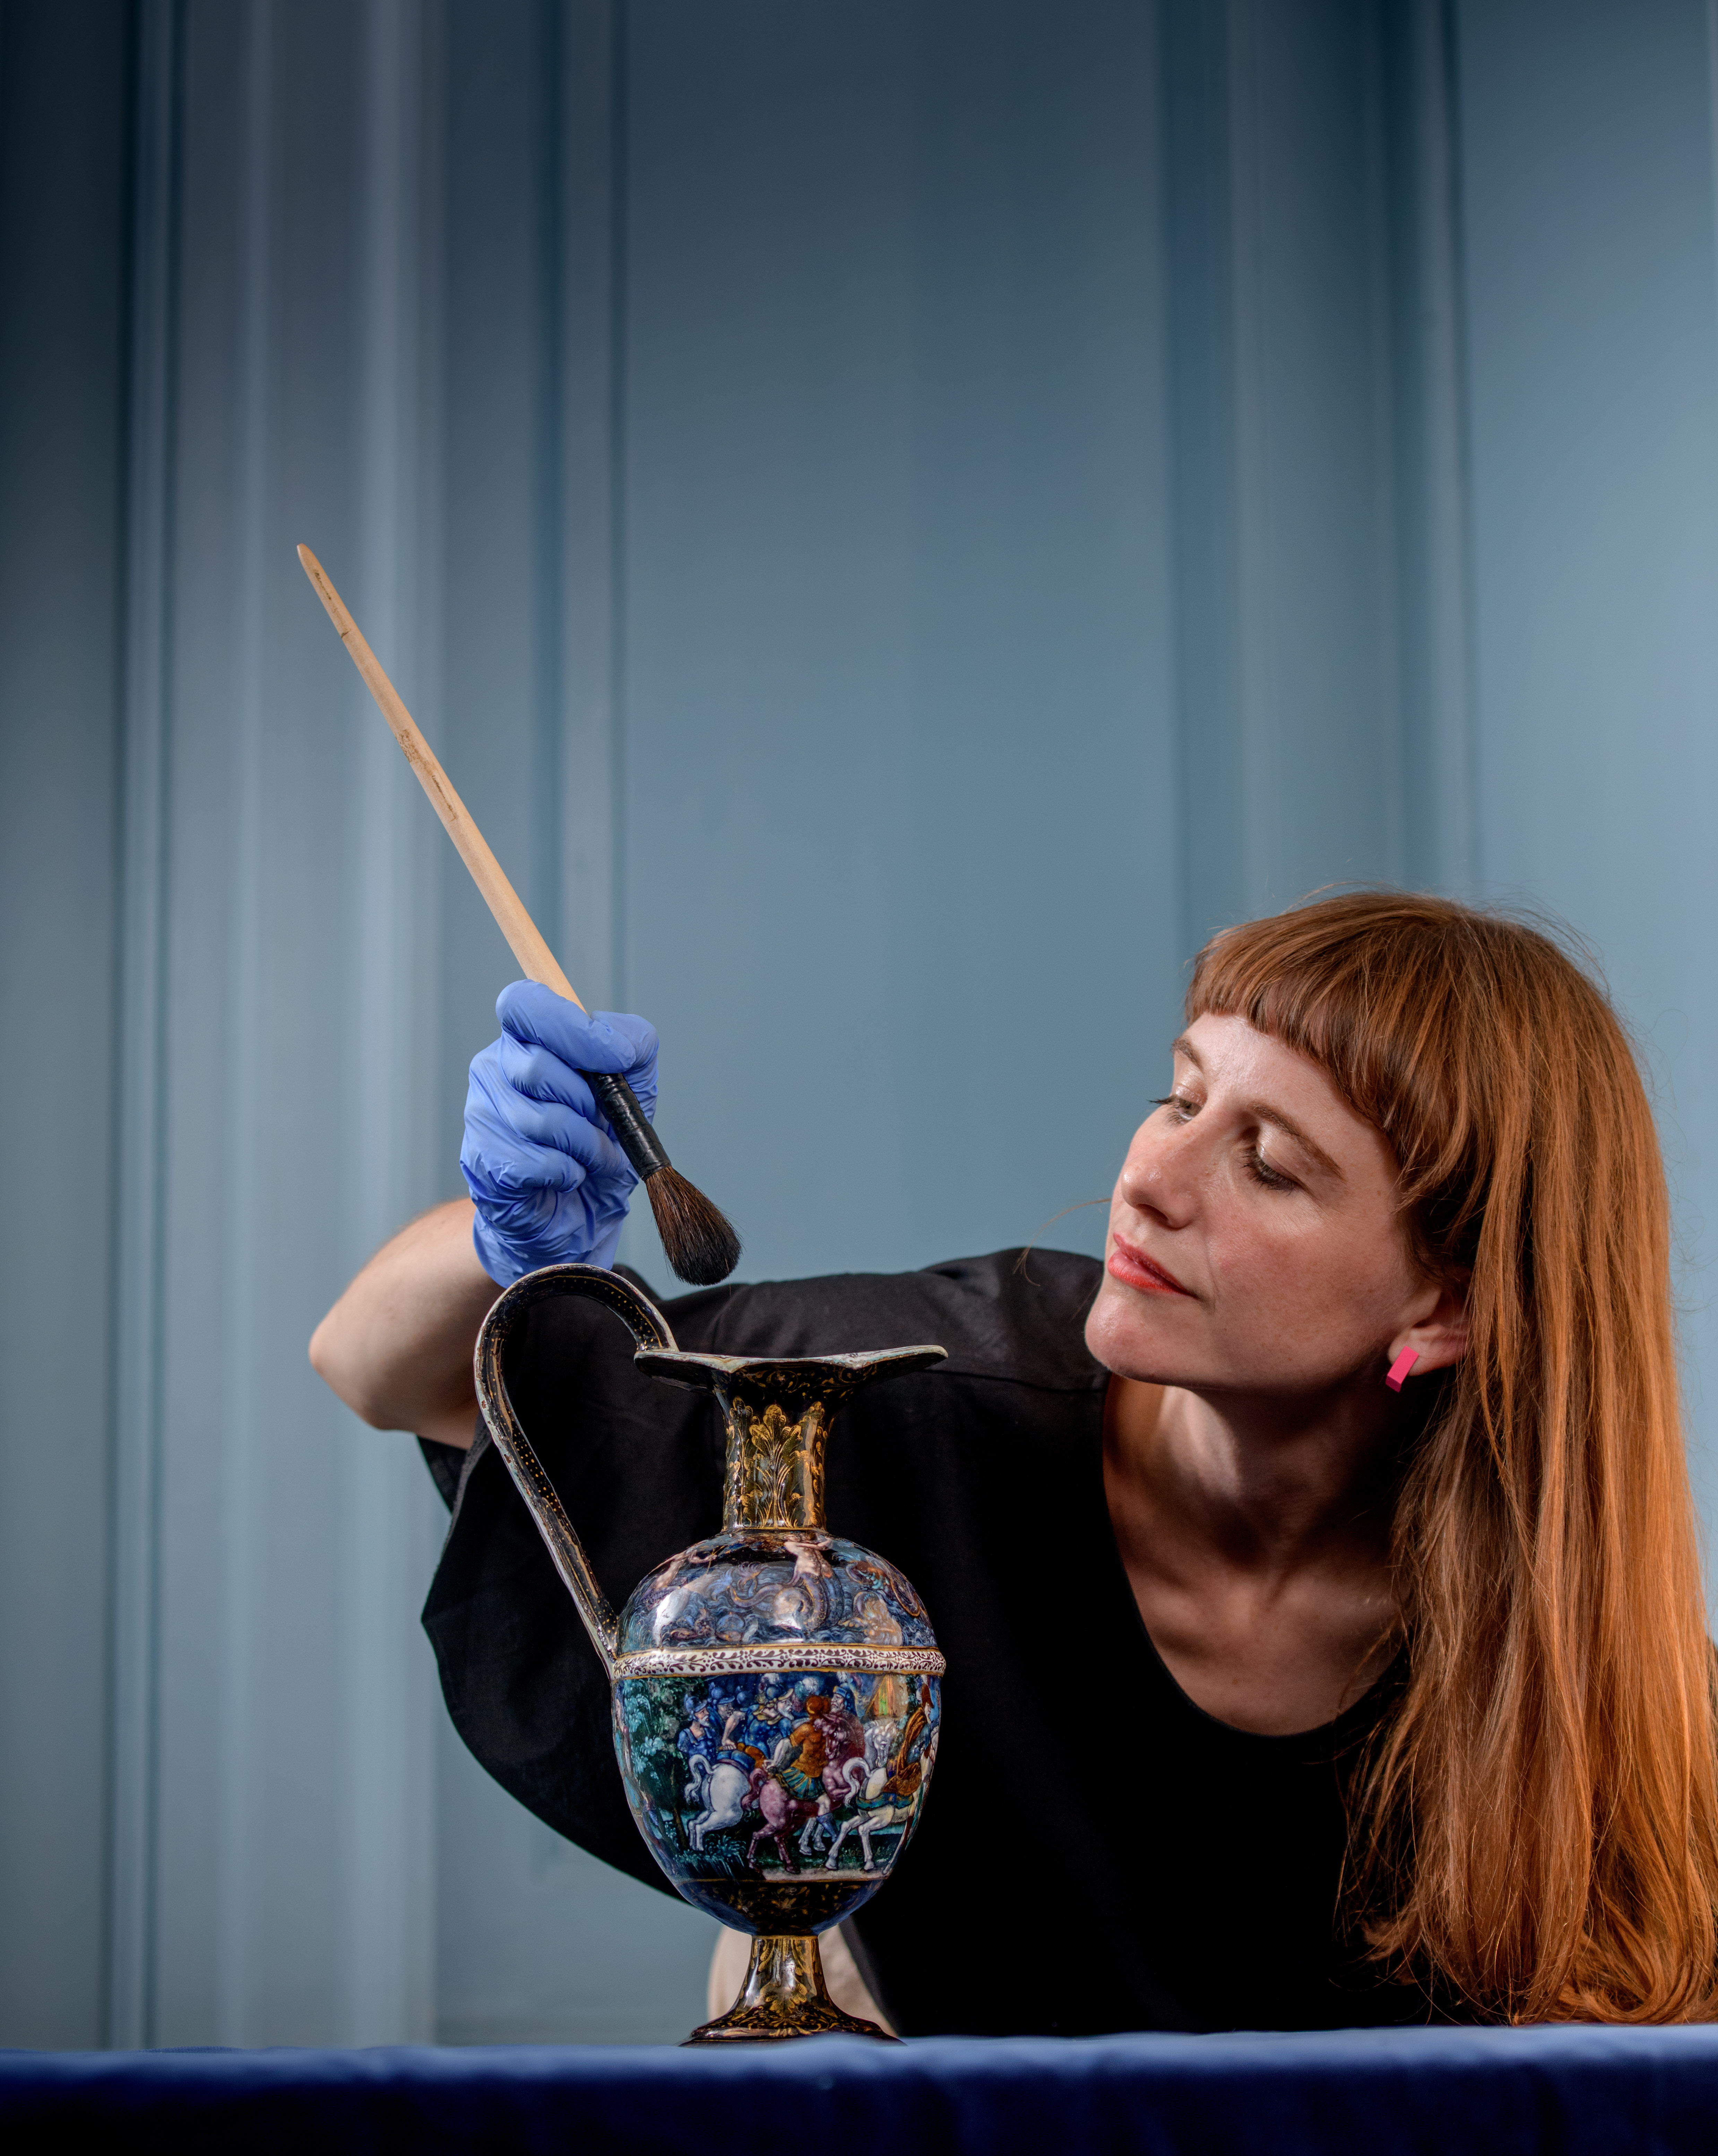 English Heritage Collections Curator Dr Sarah Moulden gives the Triton jug a final brush up before it goes on display at Ranger’s House (English Heritage)